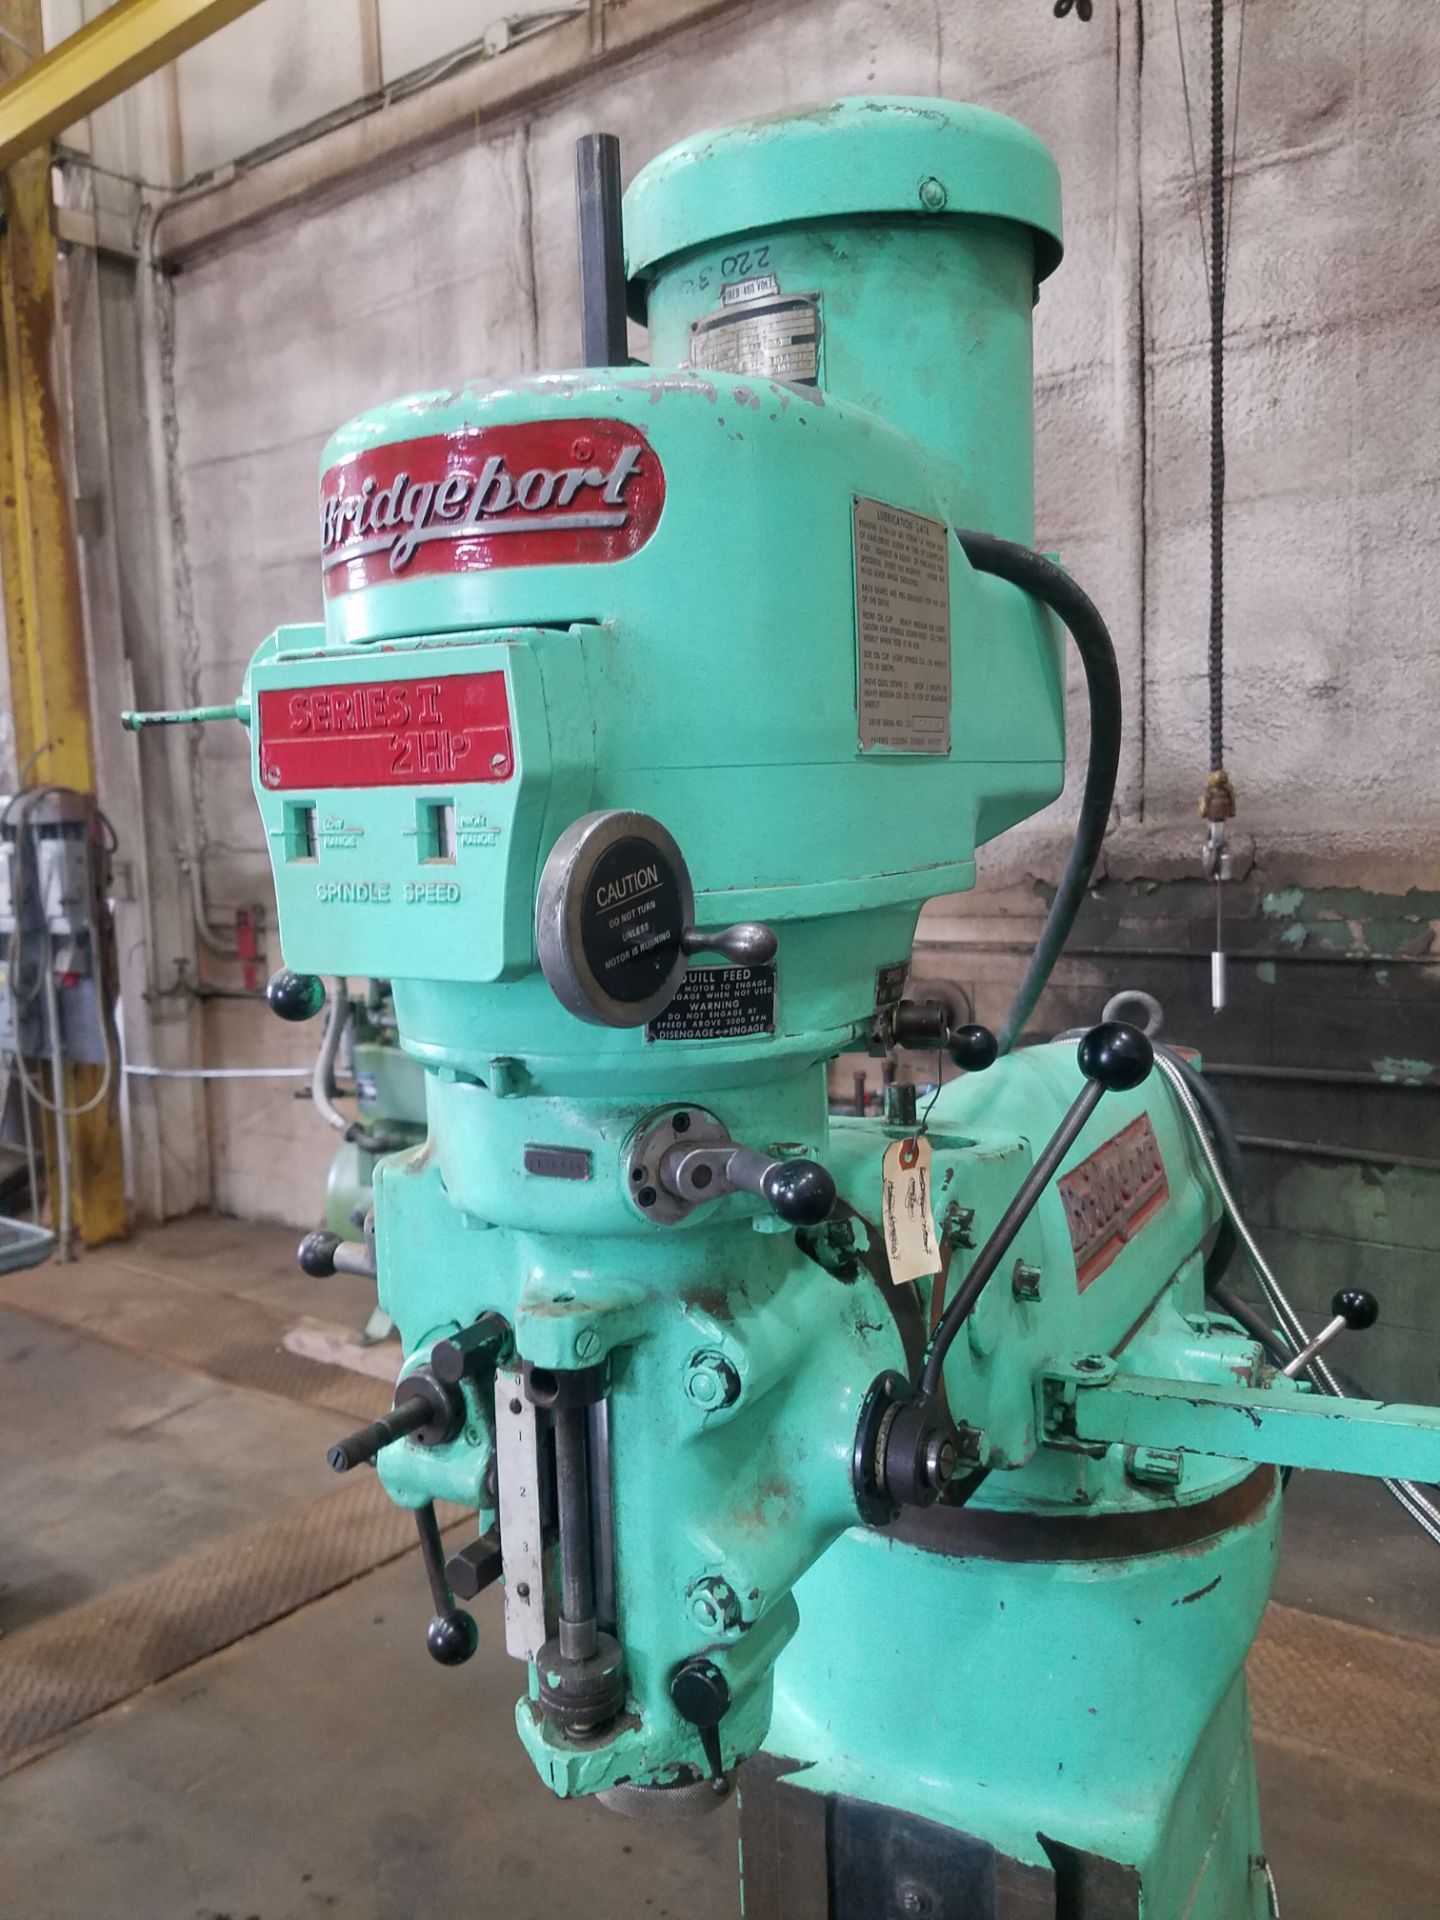 Bridgeport Series I, 2 HP Vertical Mill, s/n BR96723, New 2002, 9” X 42” Table, TPAC D.R.O. - Image 3 of 3